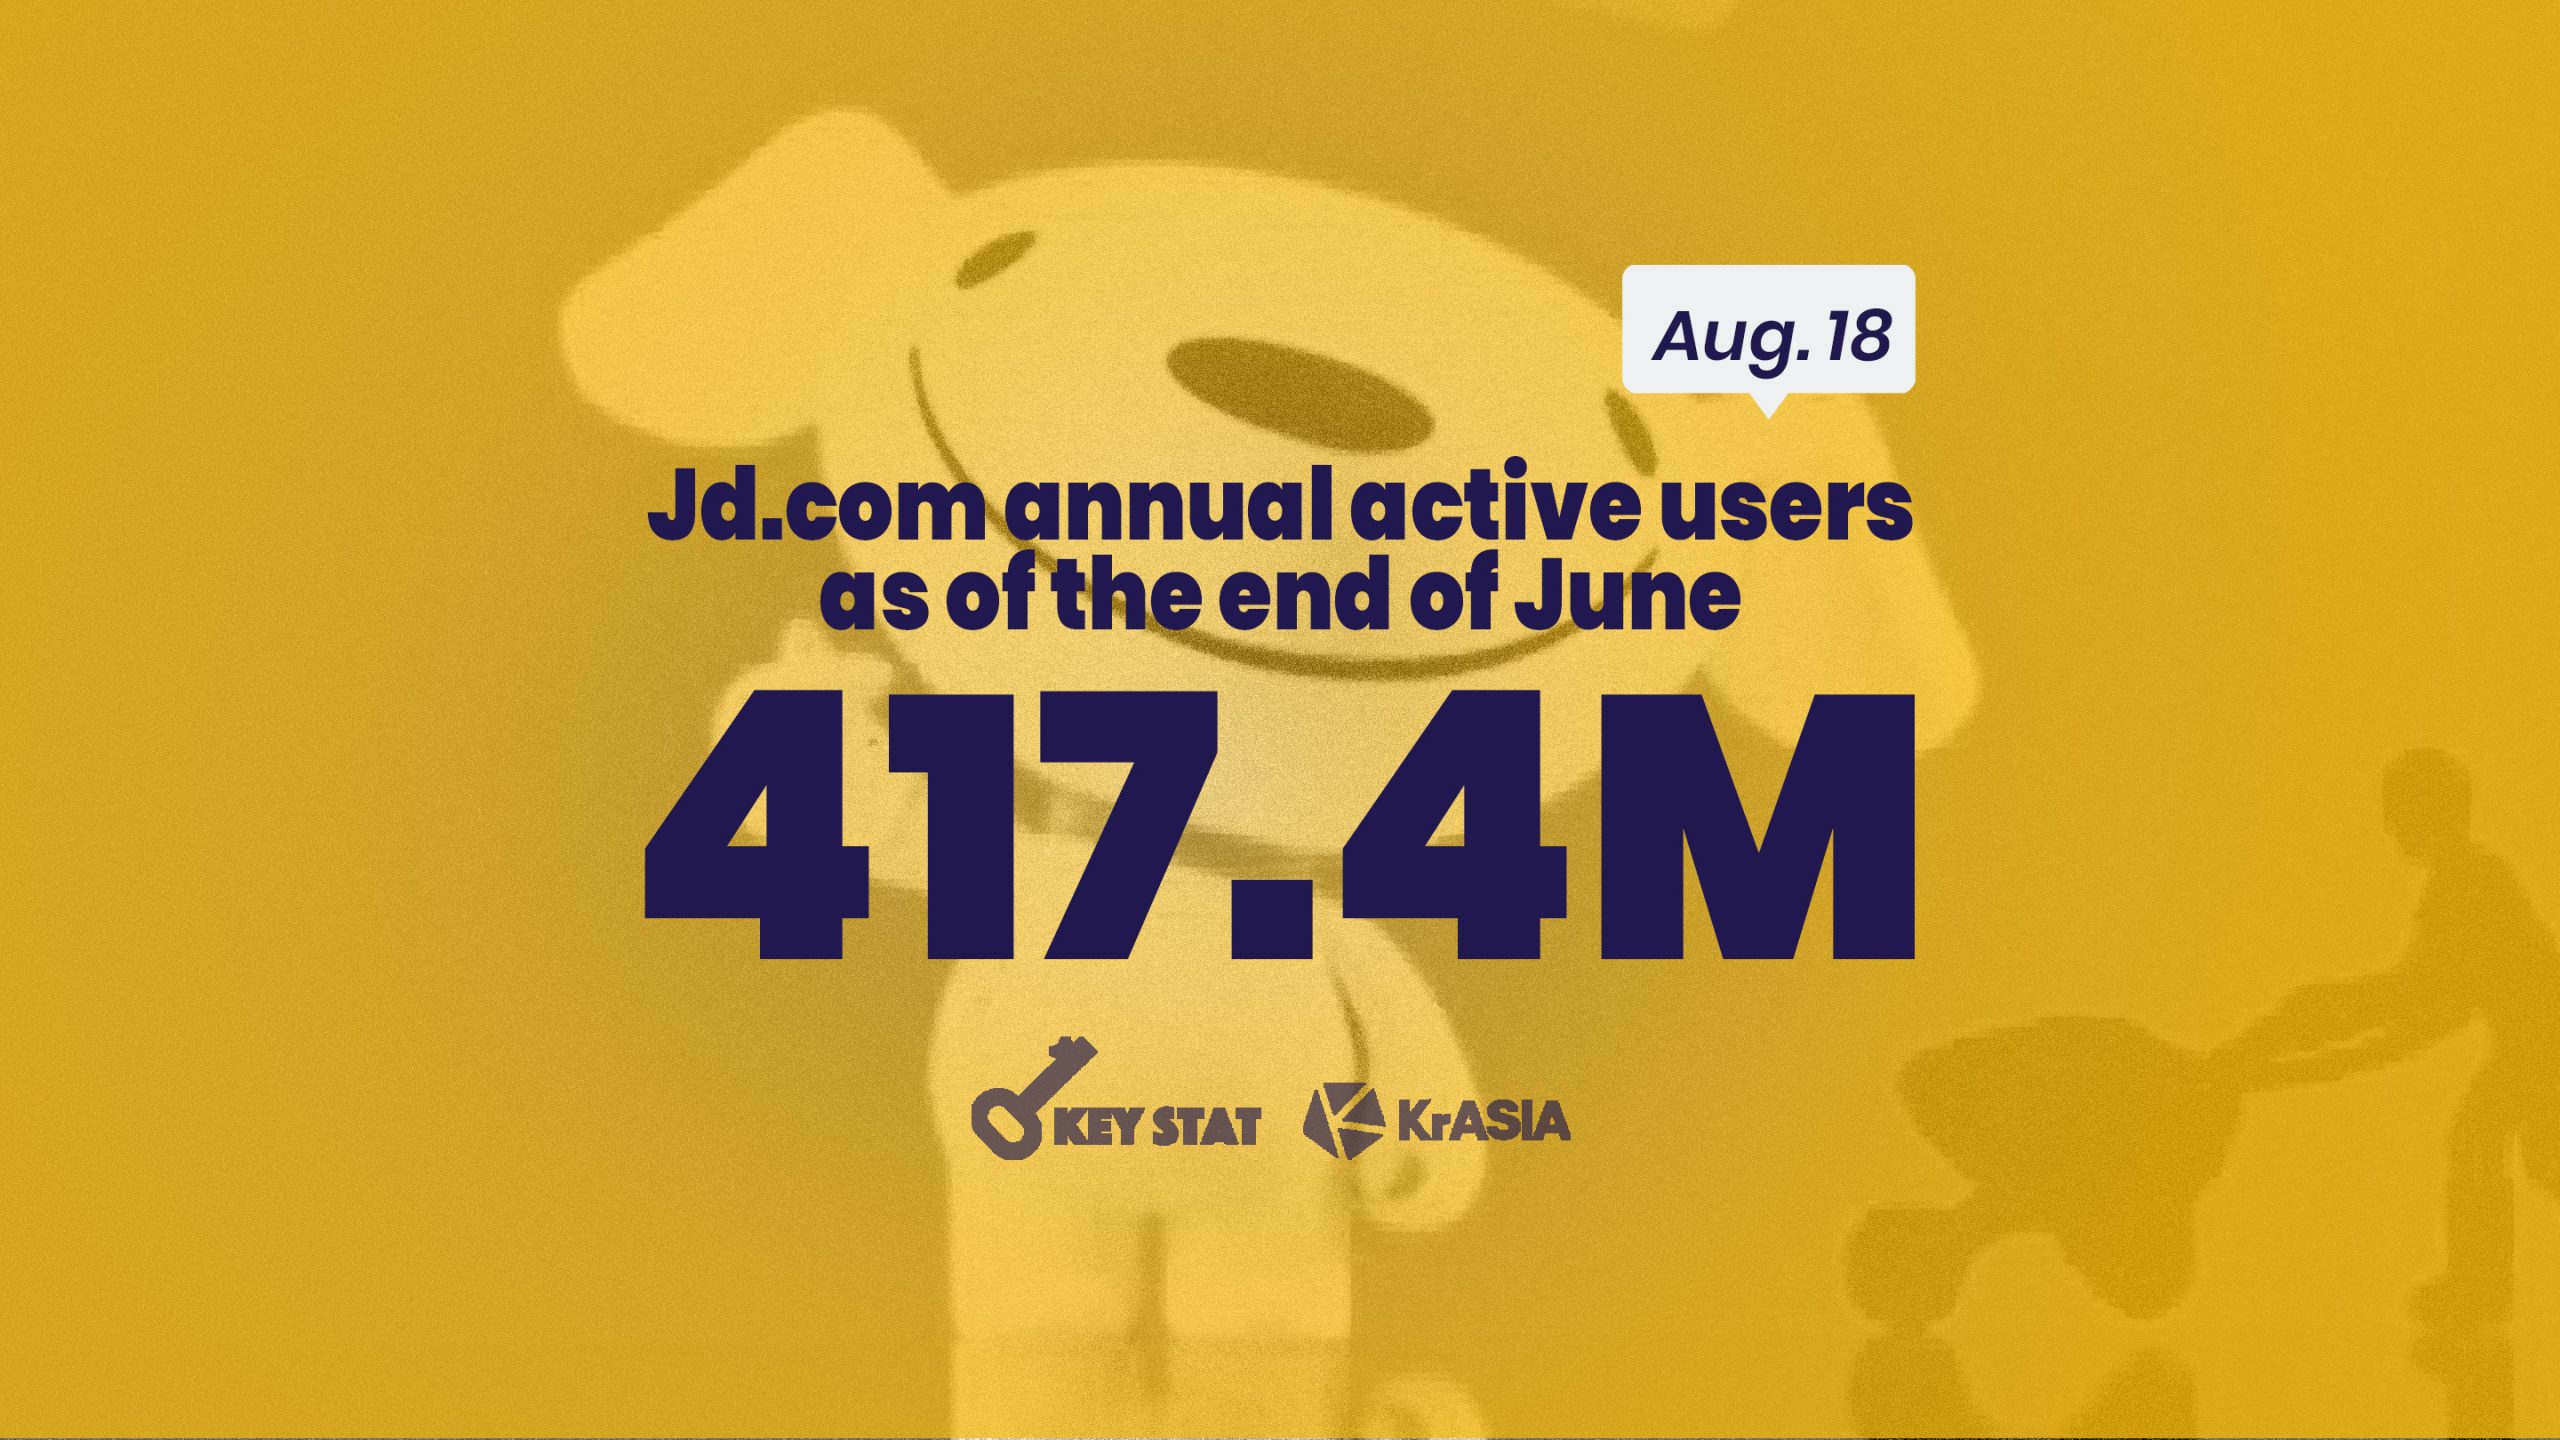 KEY STAT | E-commerce giant JD.com reports biggest user increase in three years